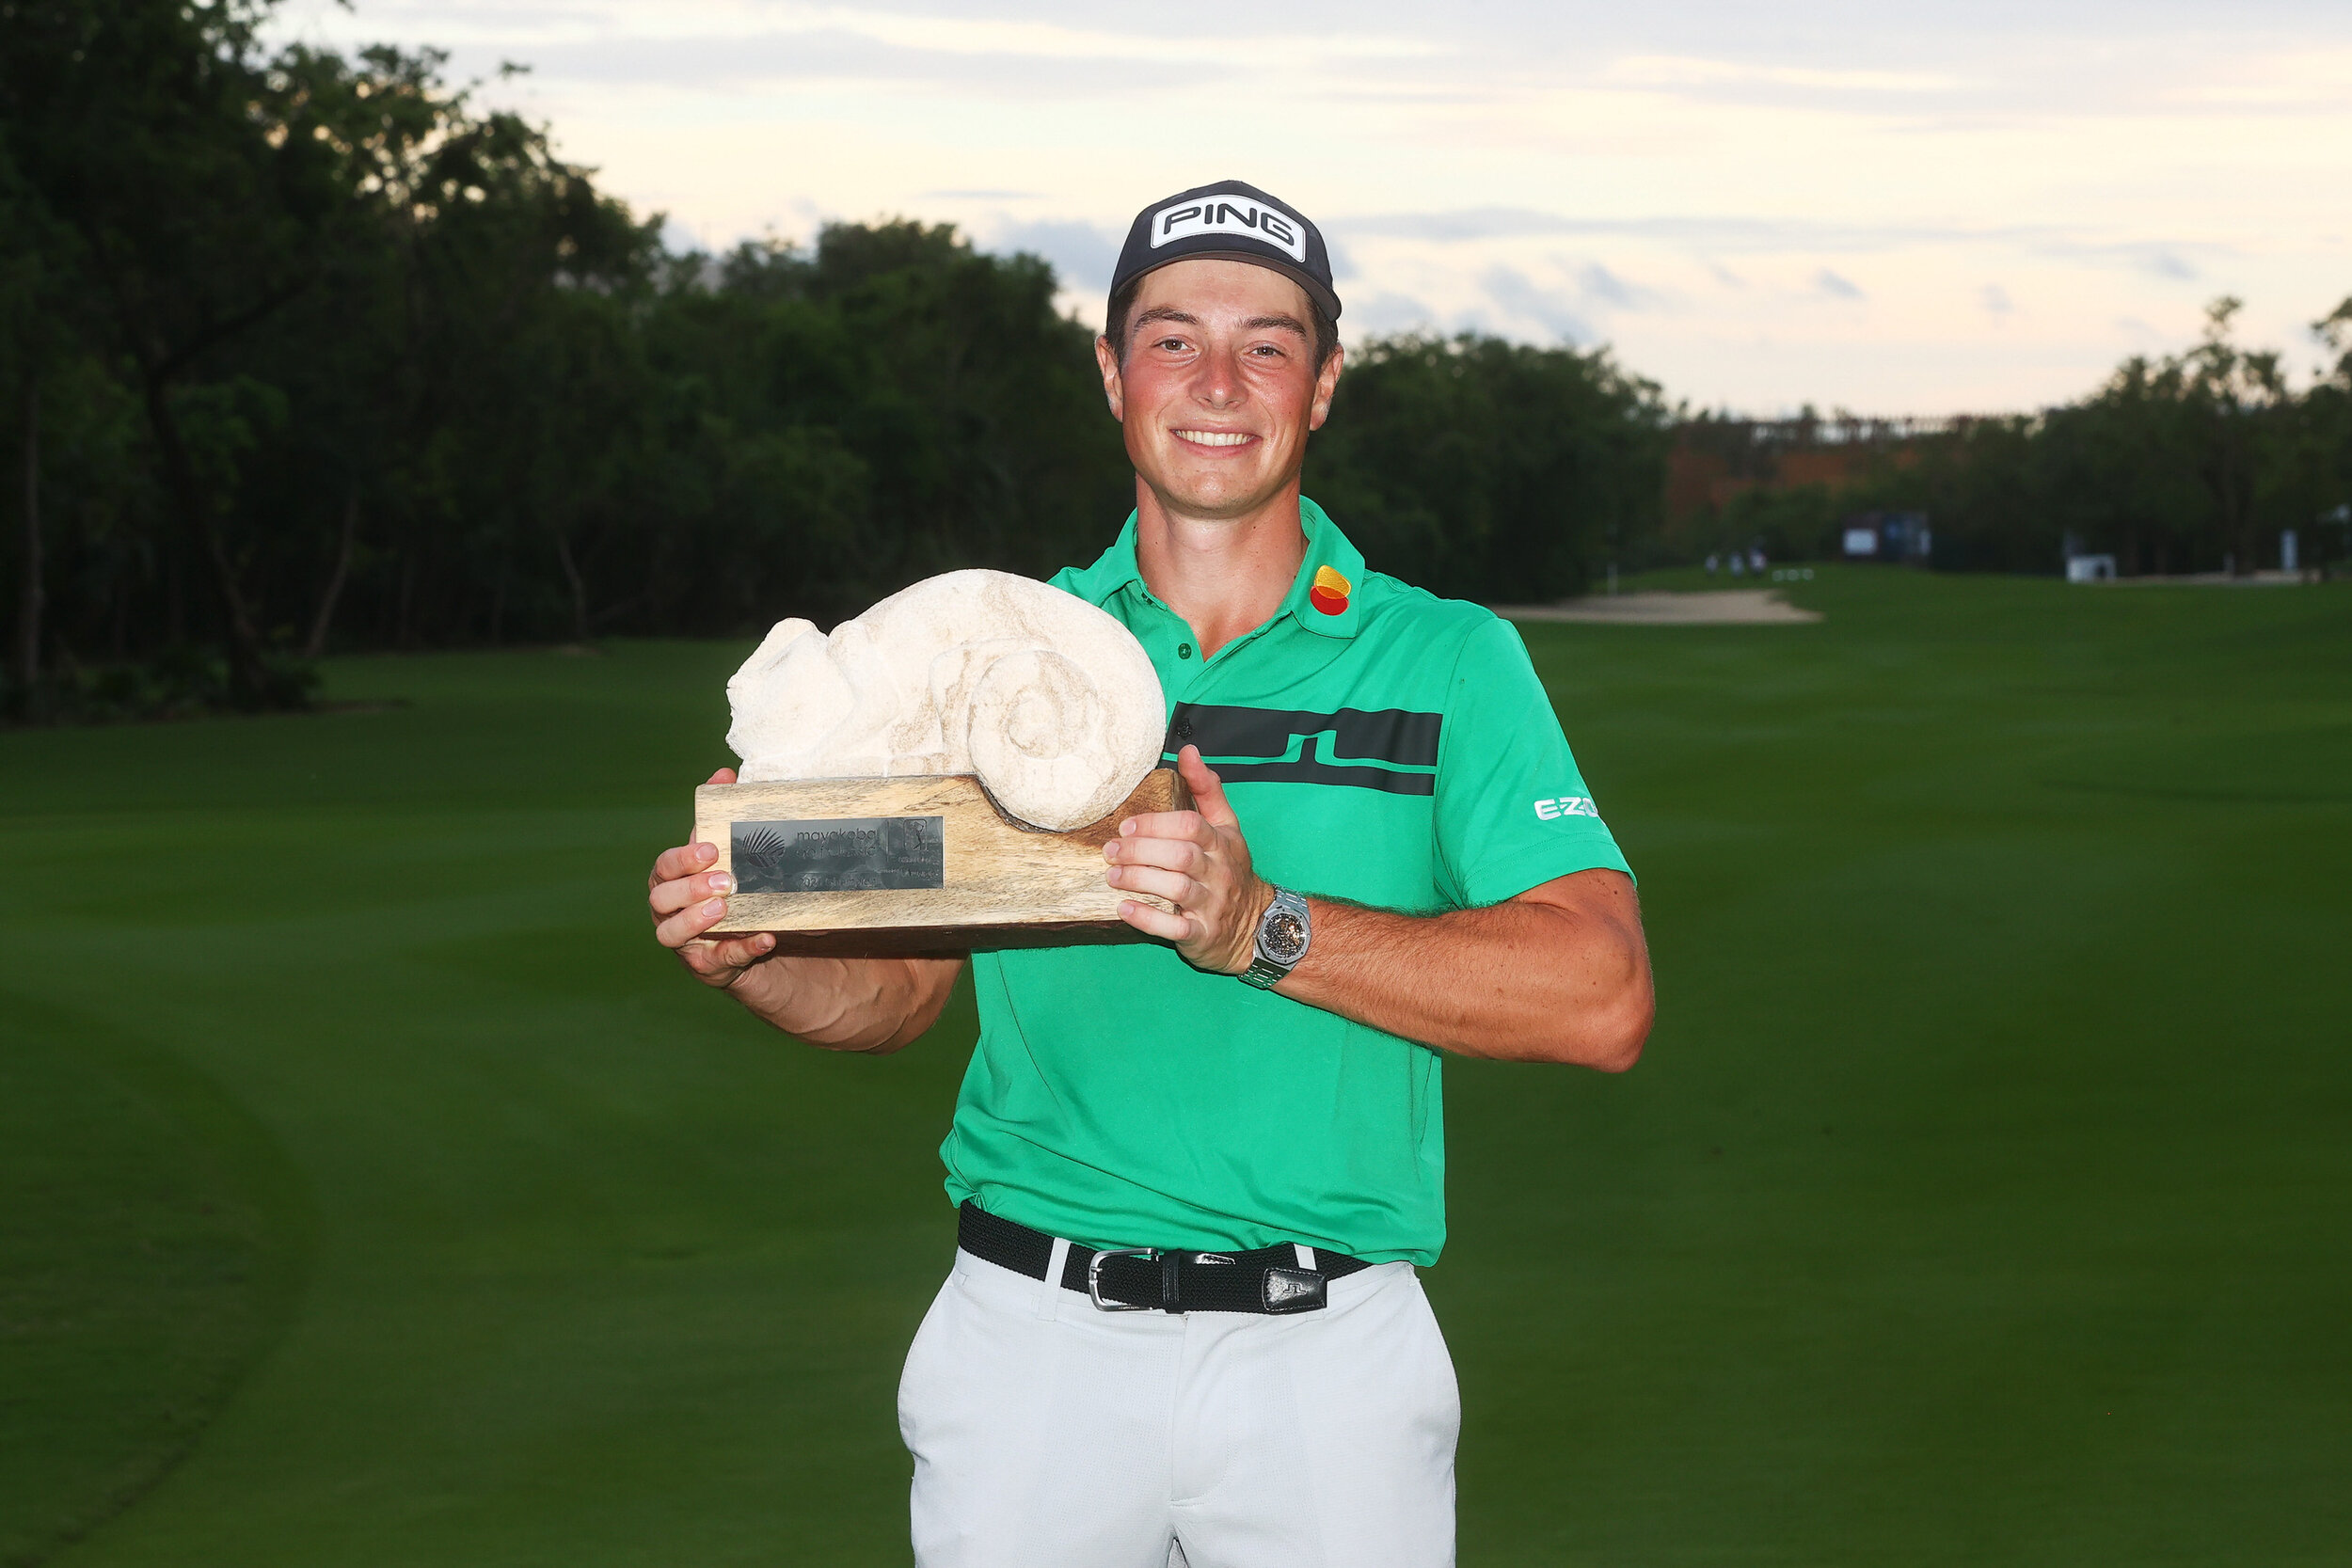  PLAYA DEL CARMEN, MEXICO - DECEMBER 06: Viktor Hovland of Norway celebrates with the winner's trophy on the 18th green after the final round of the Mayakoba Golf Classic at El Camaleón Golf Club on December 06, 2020 in Playa del Carmen, Mexico. (Pho